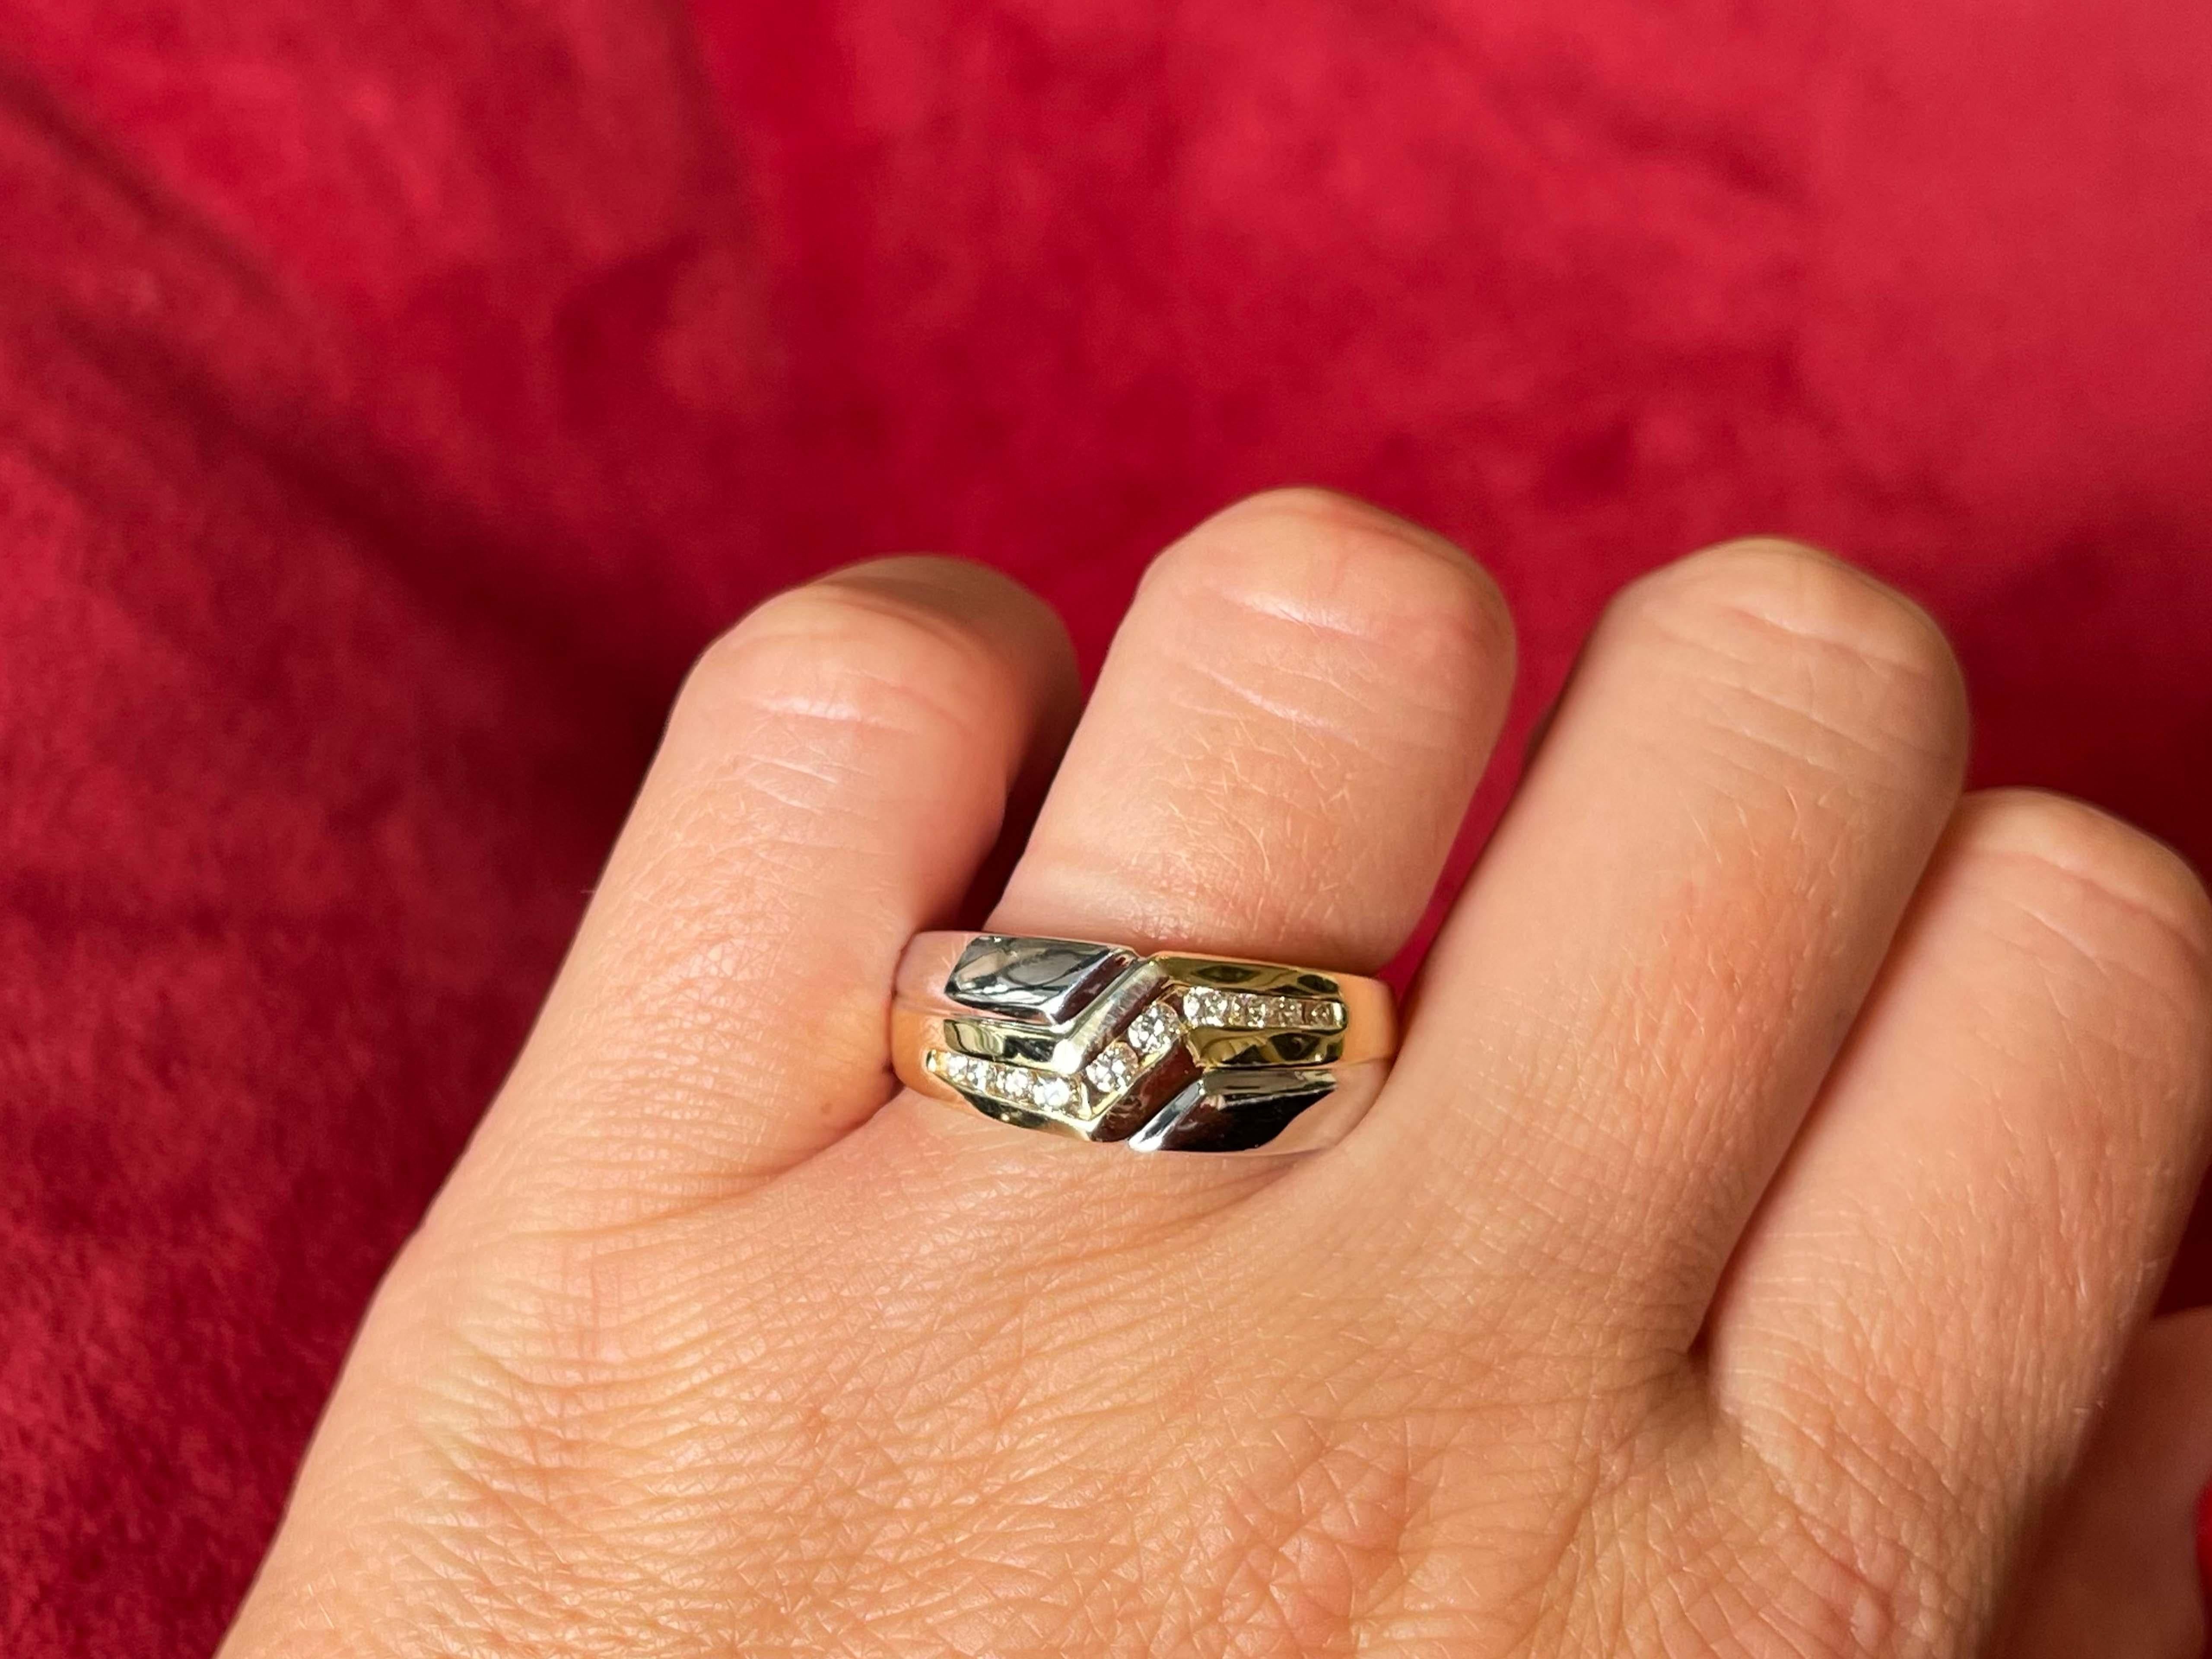 Item Specifications:

Metal: 14K Yellow Gold

Total Weight: 9.3 Grams

Ring Size: 9.75

Diamond Count: 10 Brilliant cut diamonds

Diamond Carat Weight: ~0.18 Carat

Diamond Color: G

Diamond Clarity: SI1-SI2

Condition: Preowned, excellent

Stamped: